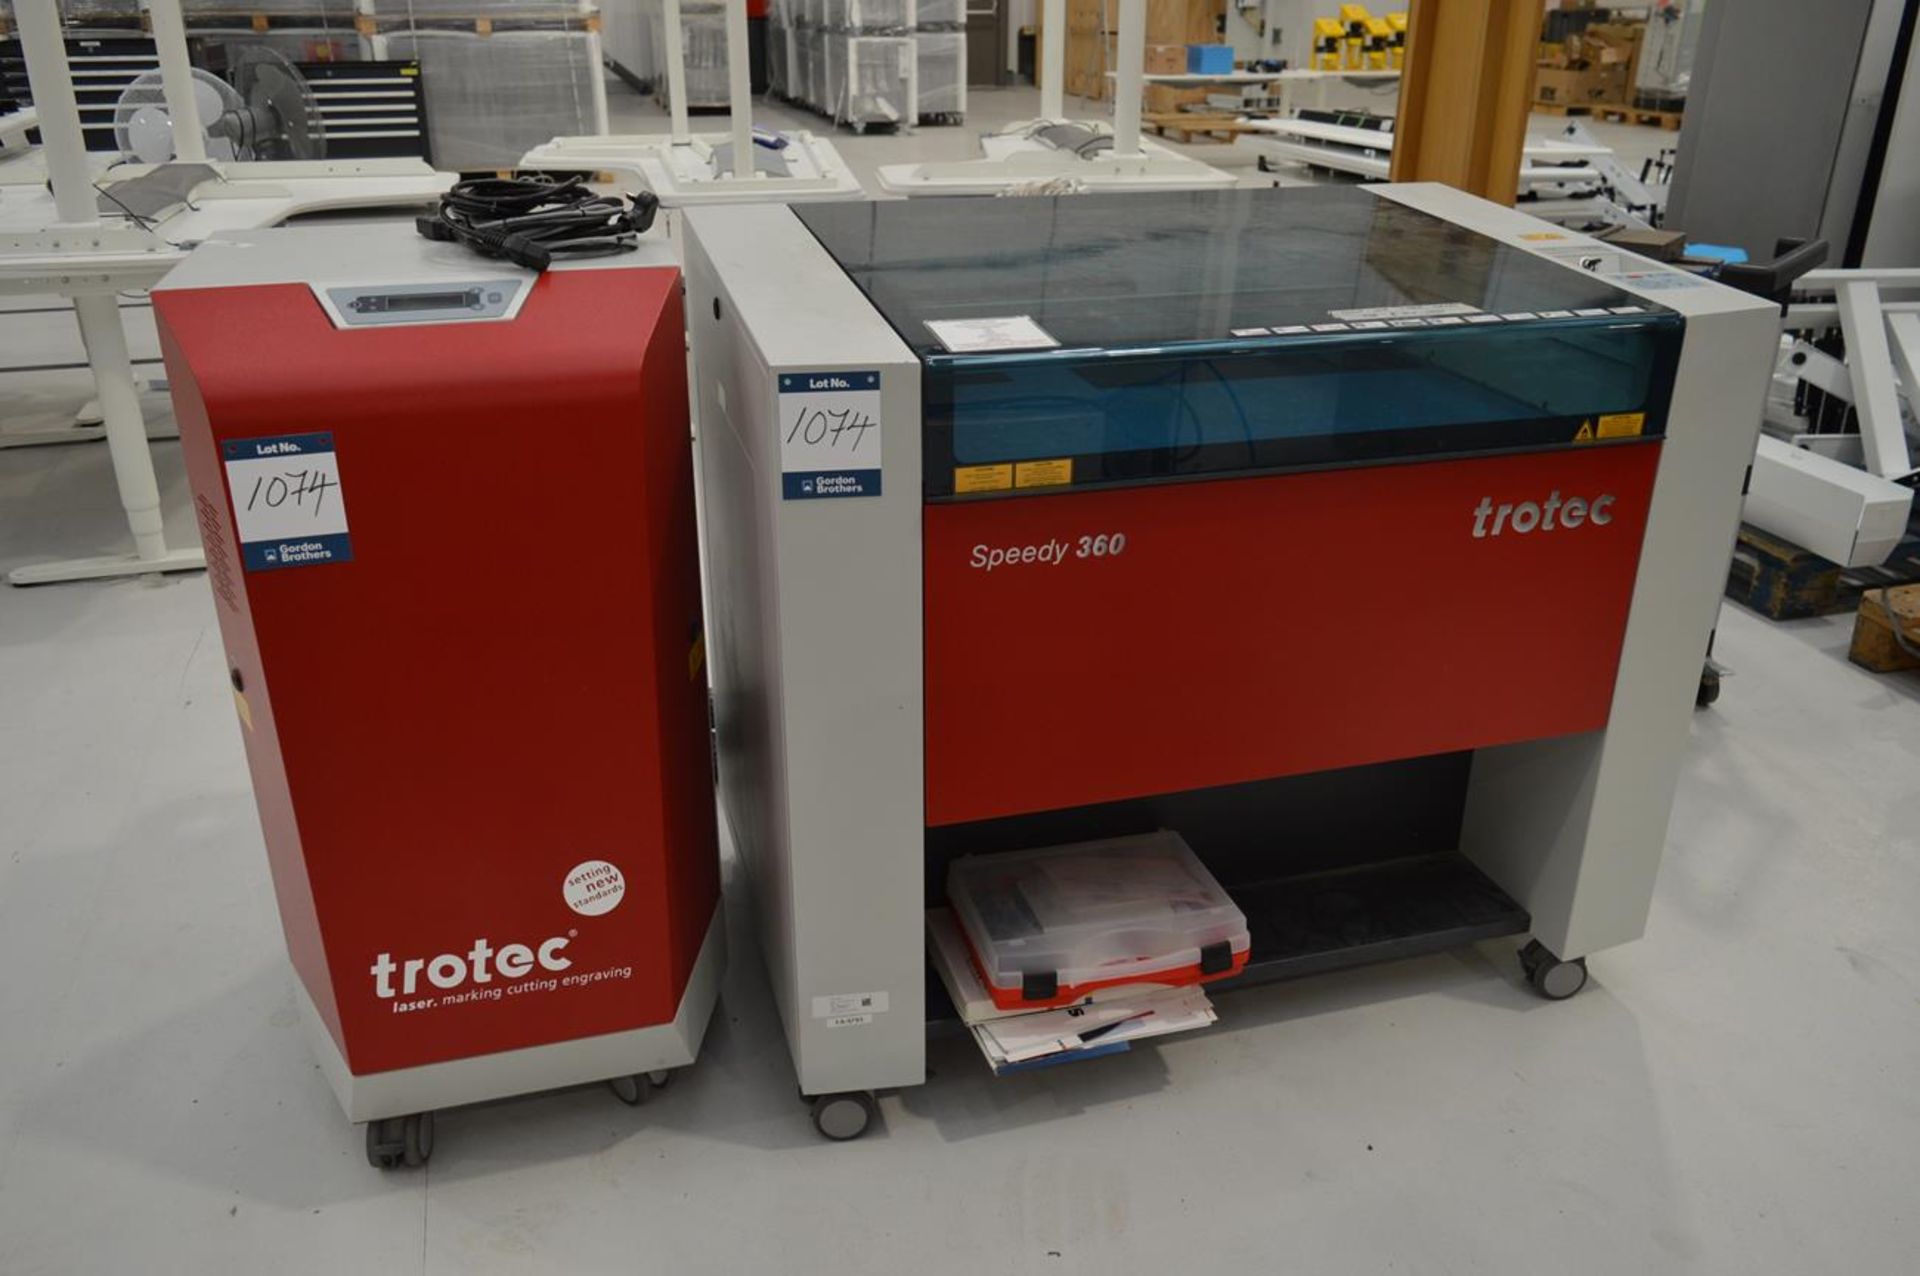 Trotec, Speedy 360 CO2 laser cutter and engraver , Serial No. S36-1408 with controller